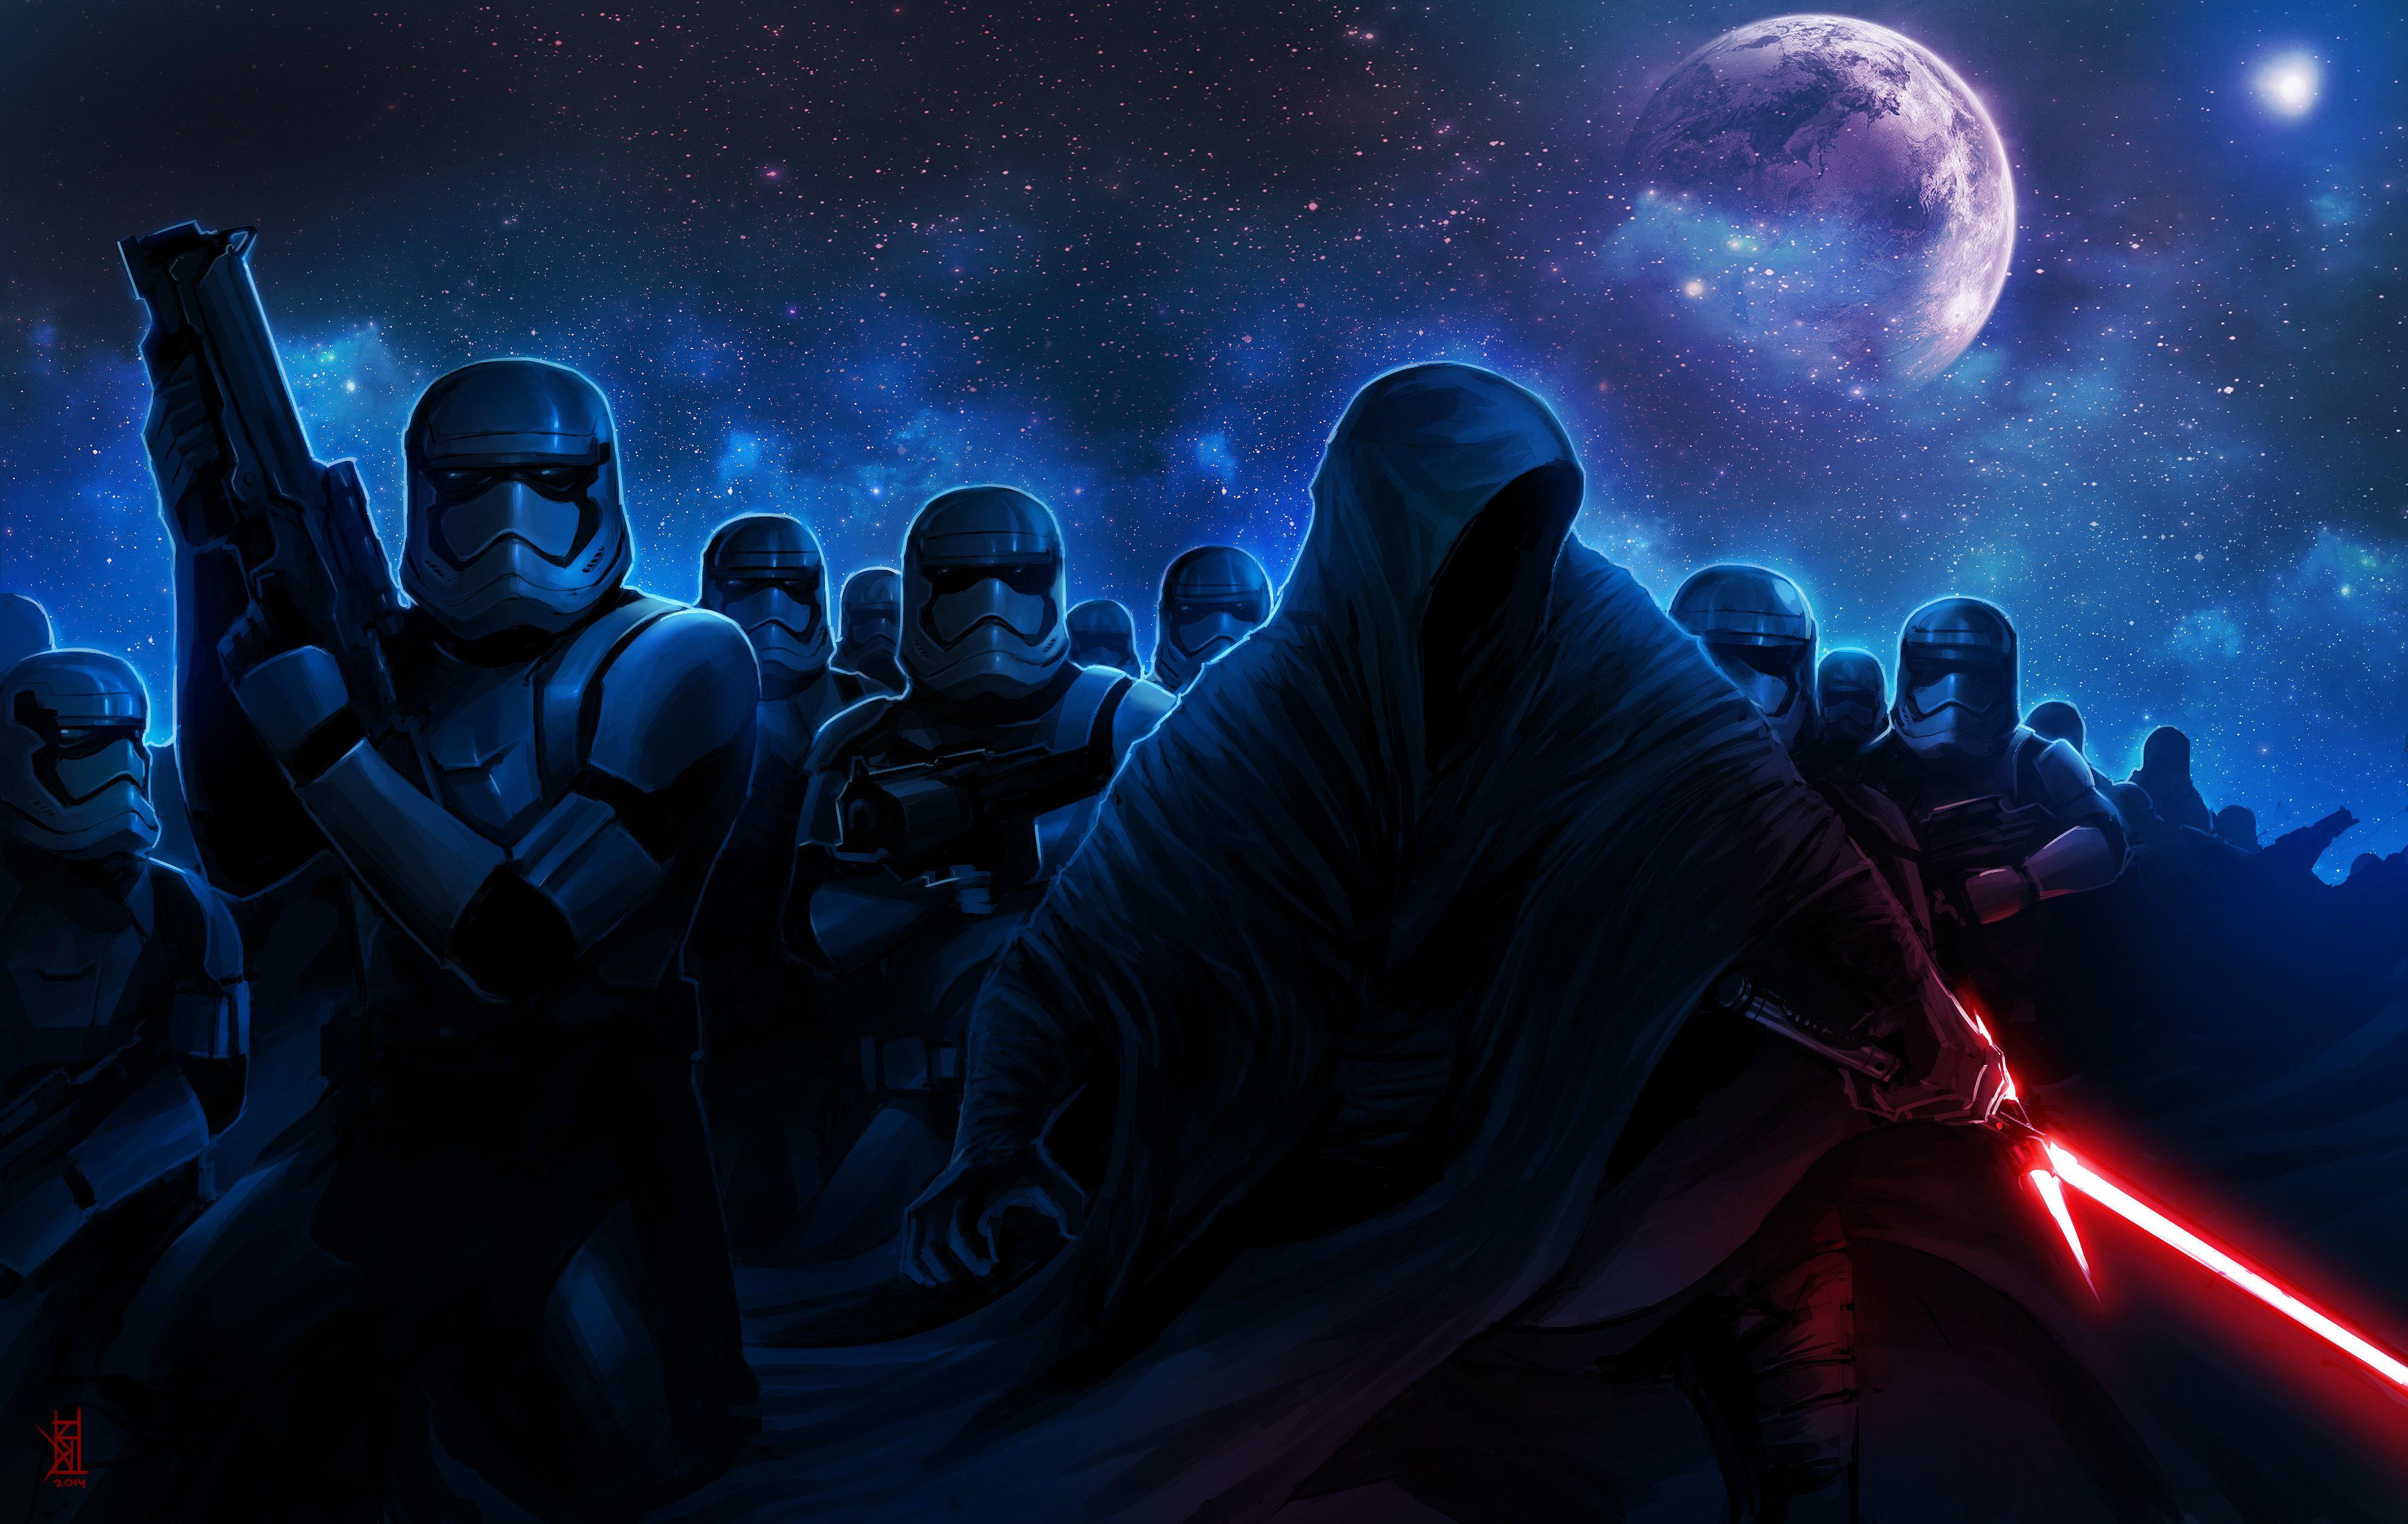 animated star wars wallpaper for android